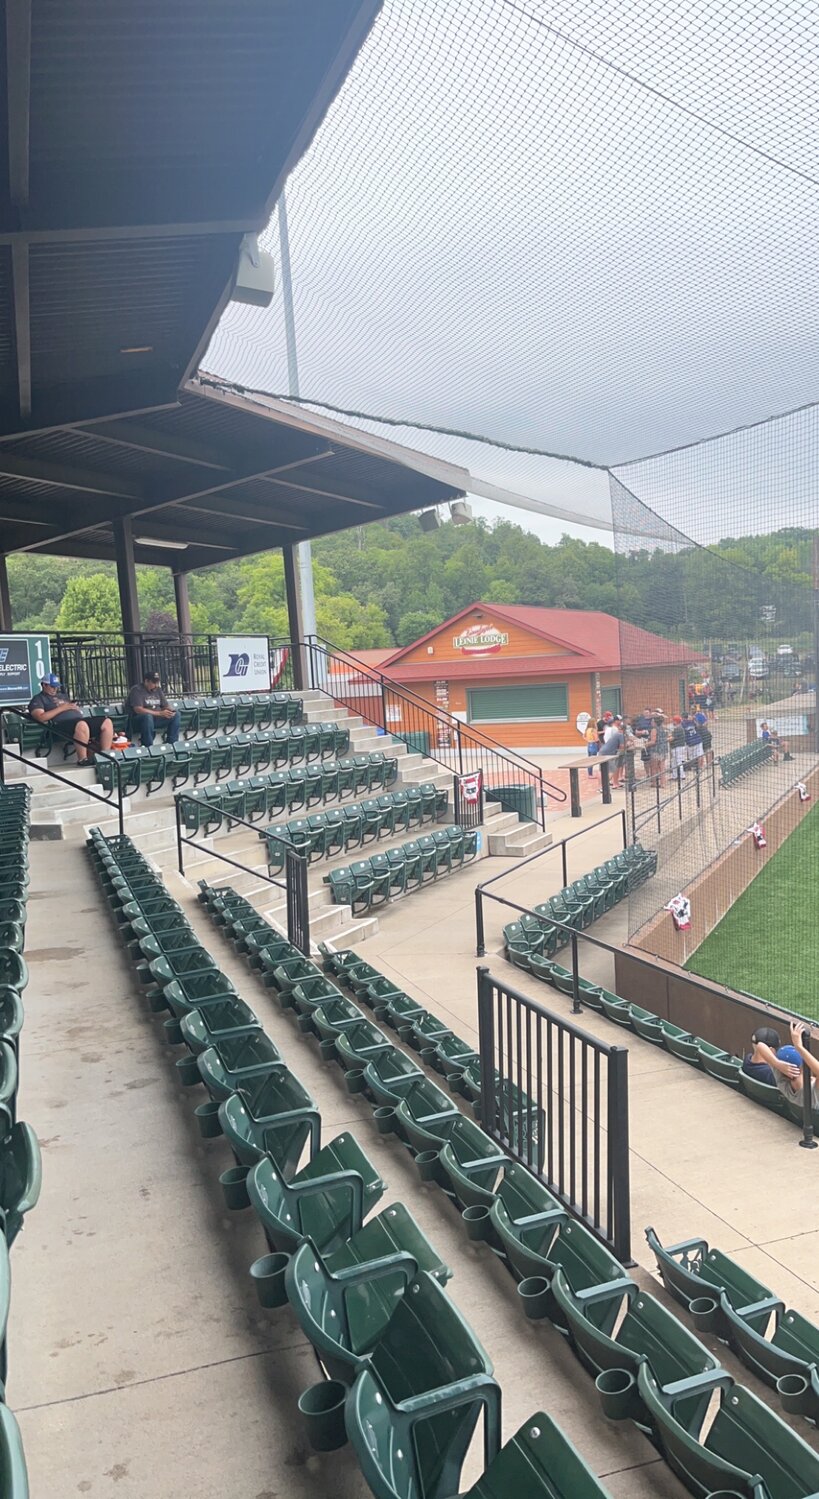 The ballpark seats at the First National Bank of River Falls Field after a town ball game last summer. The field will be home to many more games and practices starting in the spring of 2025, as the University of Wisconsin-River Falls’ baseball team is slated to make the facility its home ballpark.